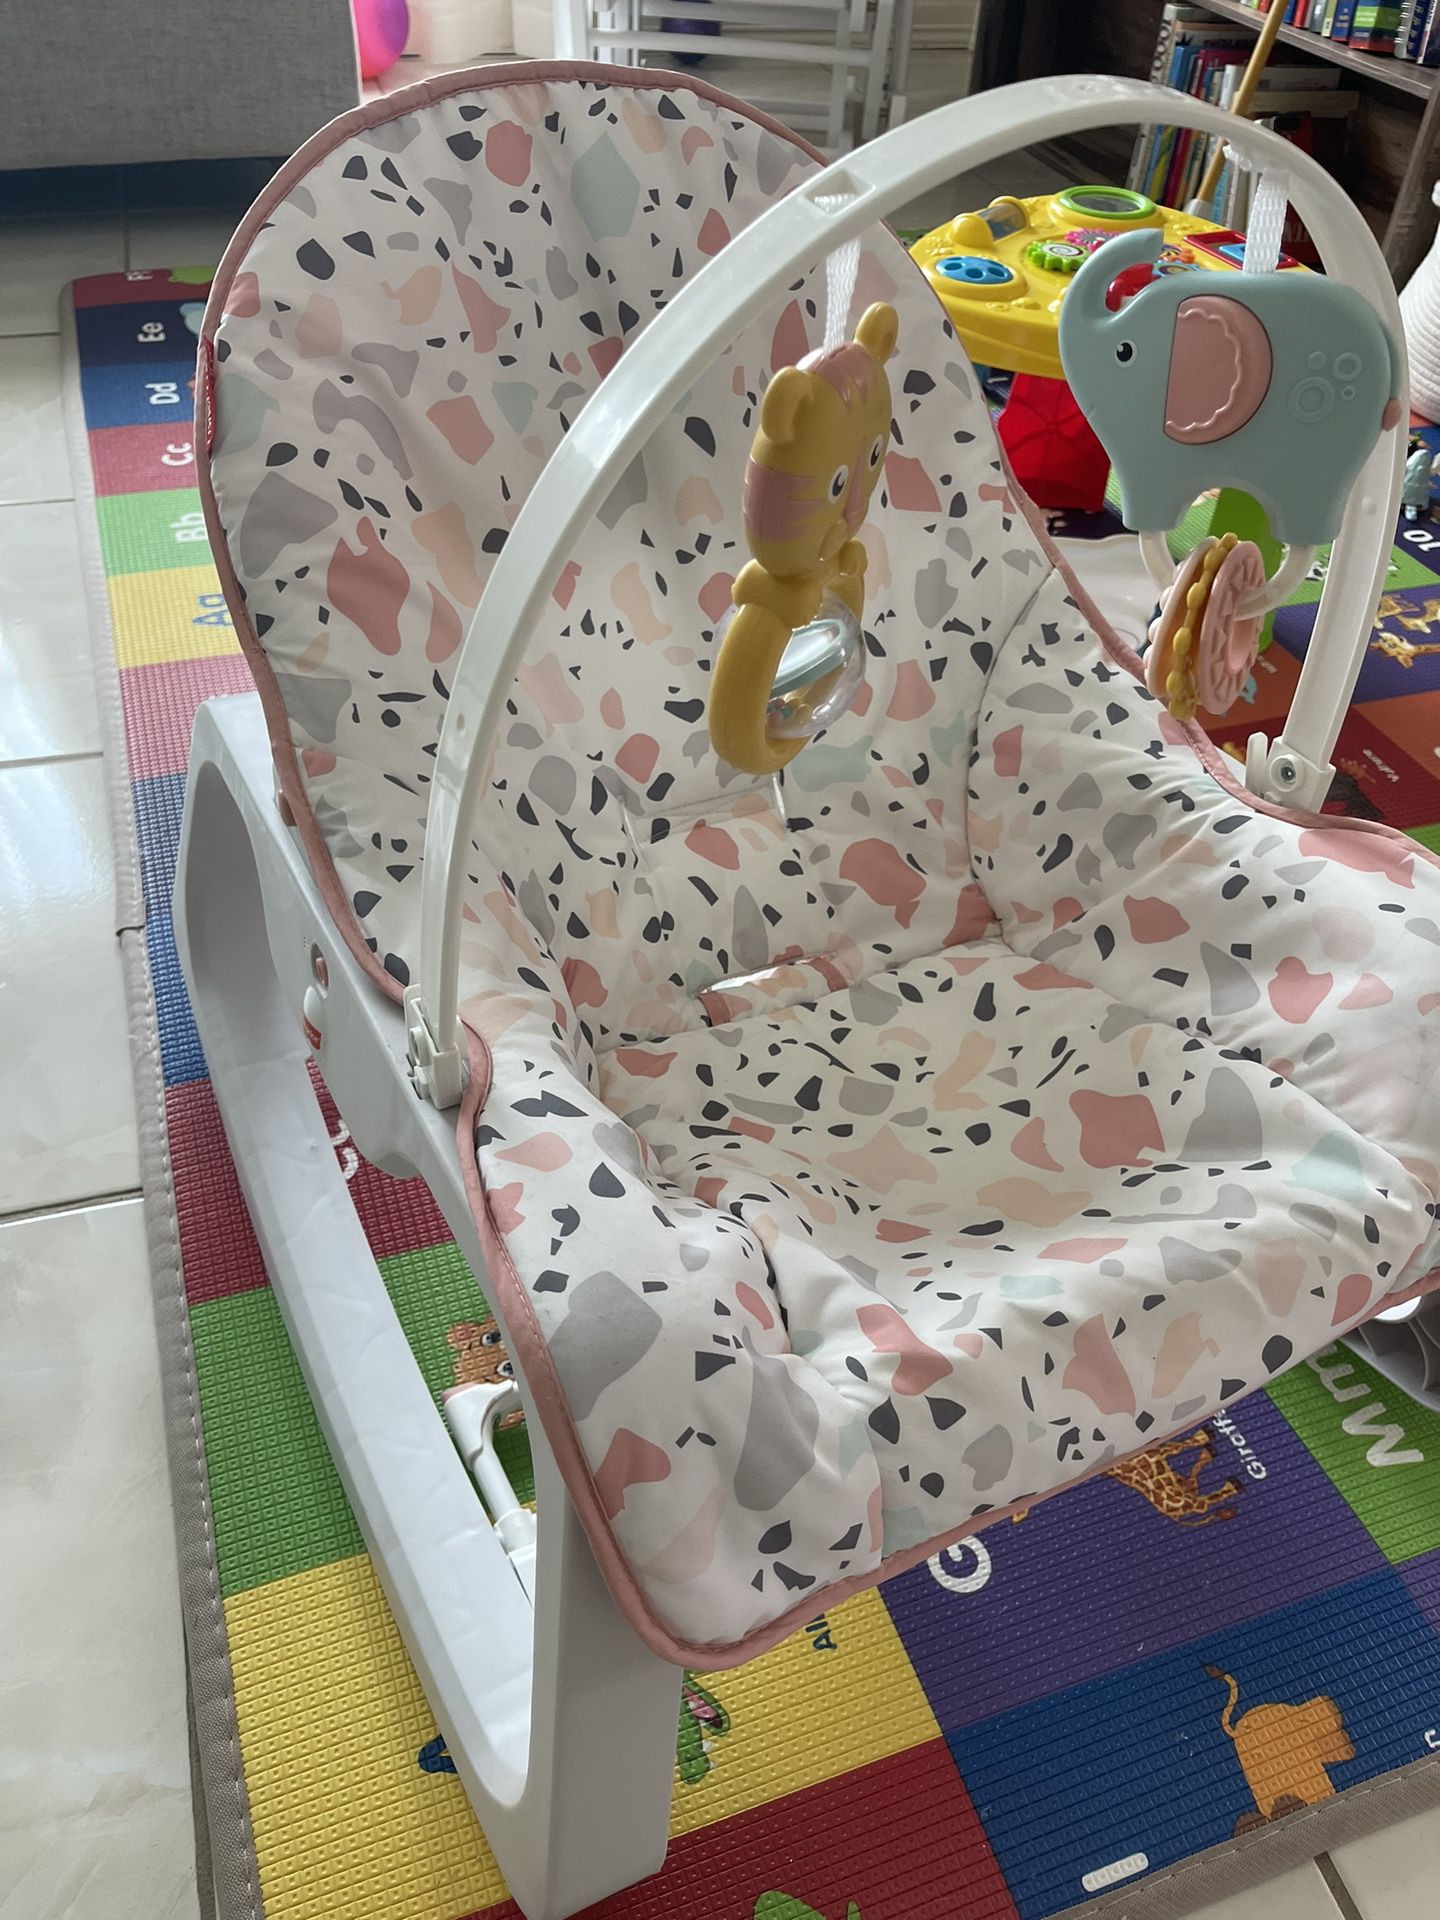 Pebble Fisher-Price Infant-to-Toddler Rocker Chair $30 (Brownsville)